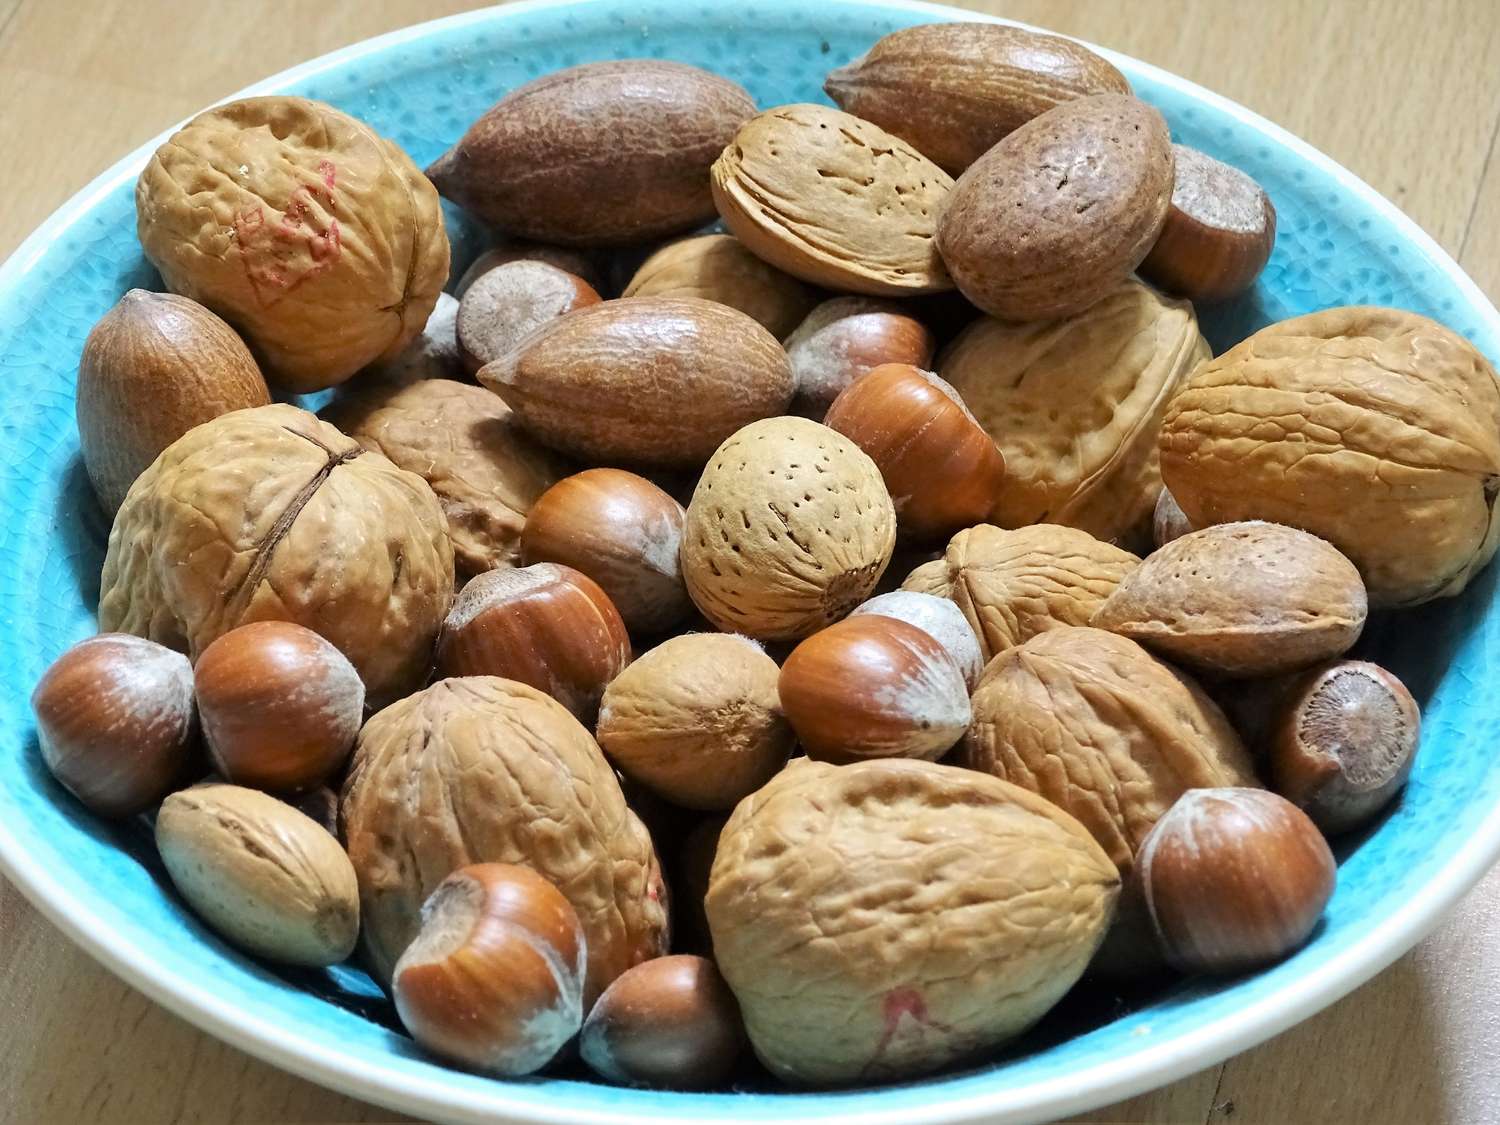 A bowl containing mixed nuts